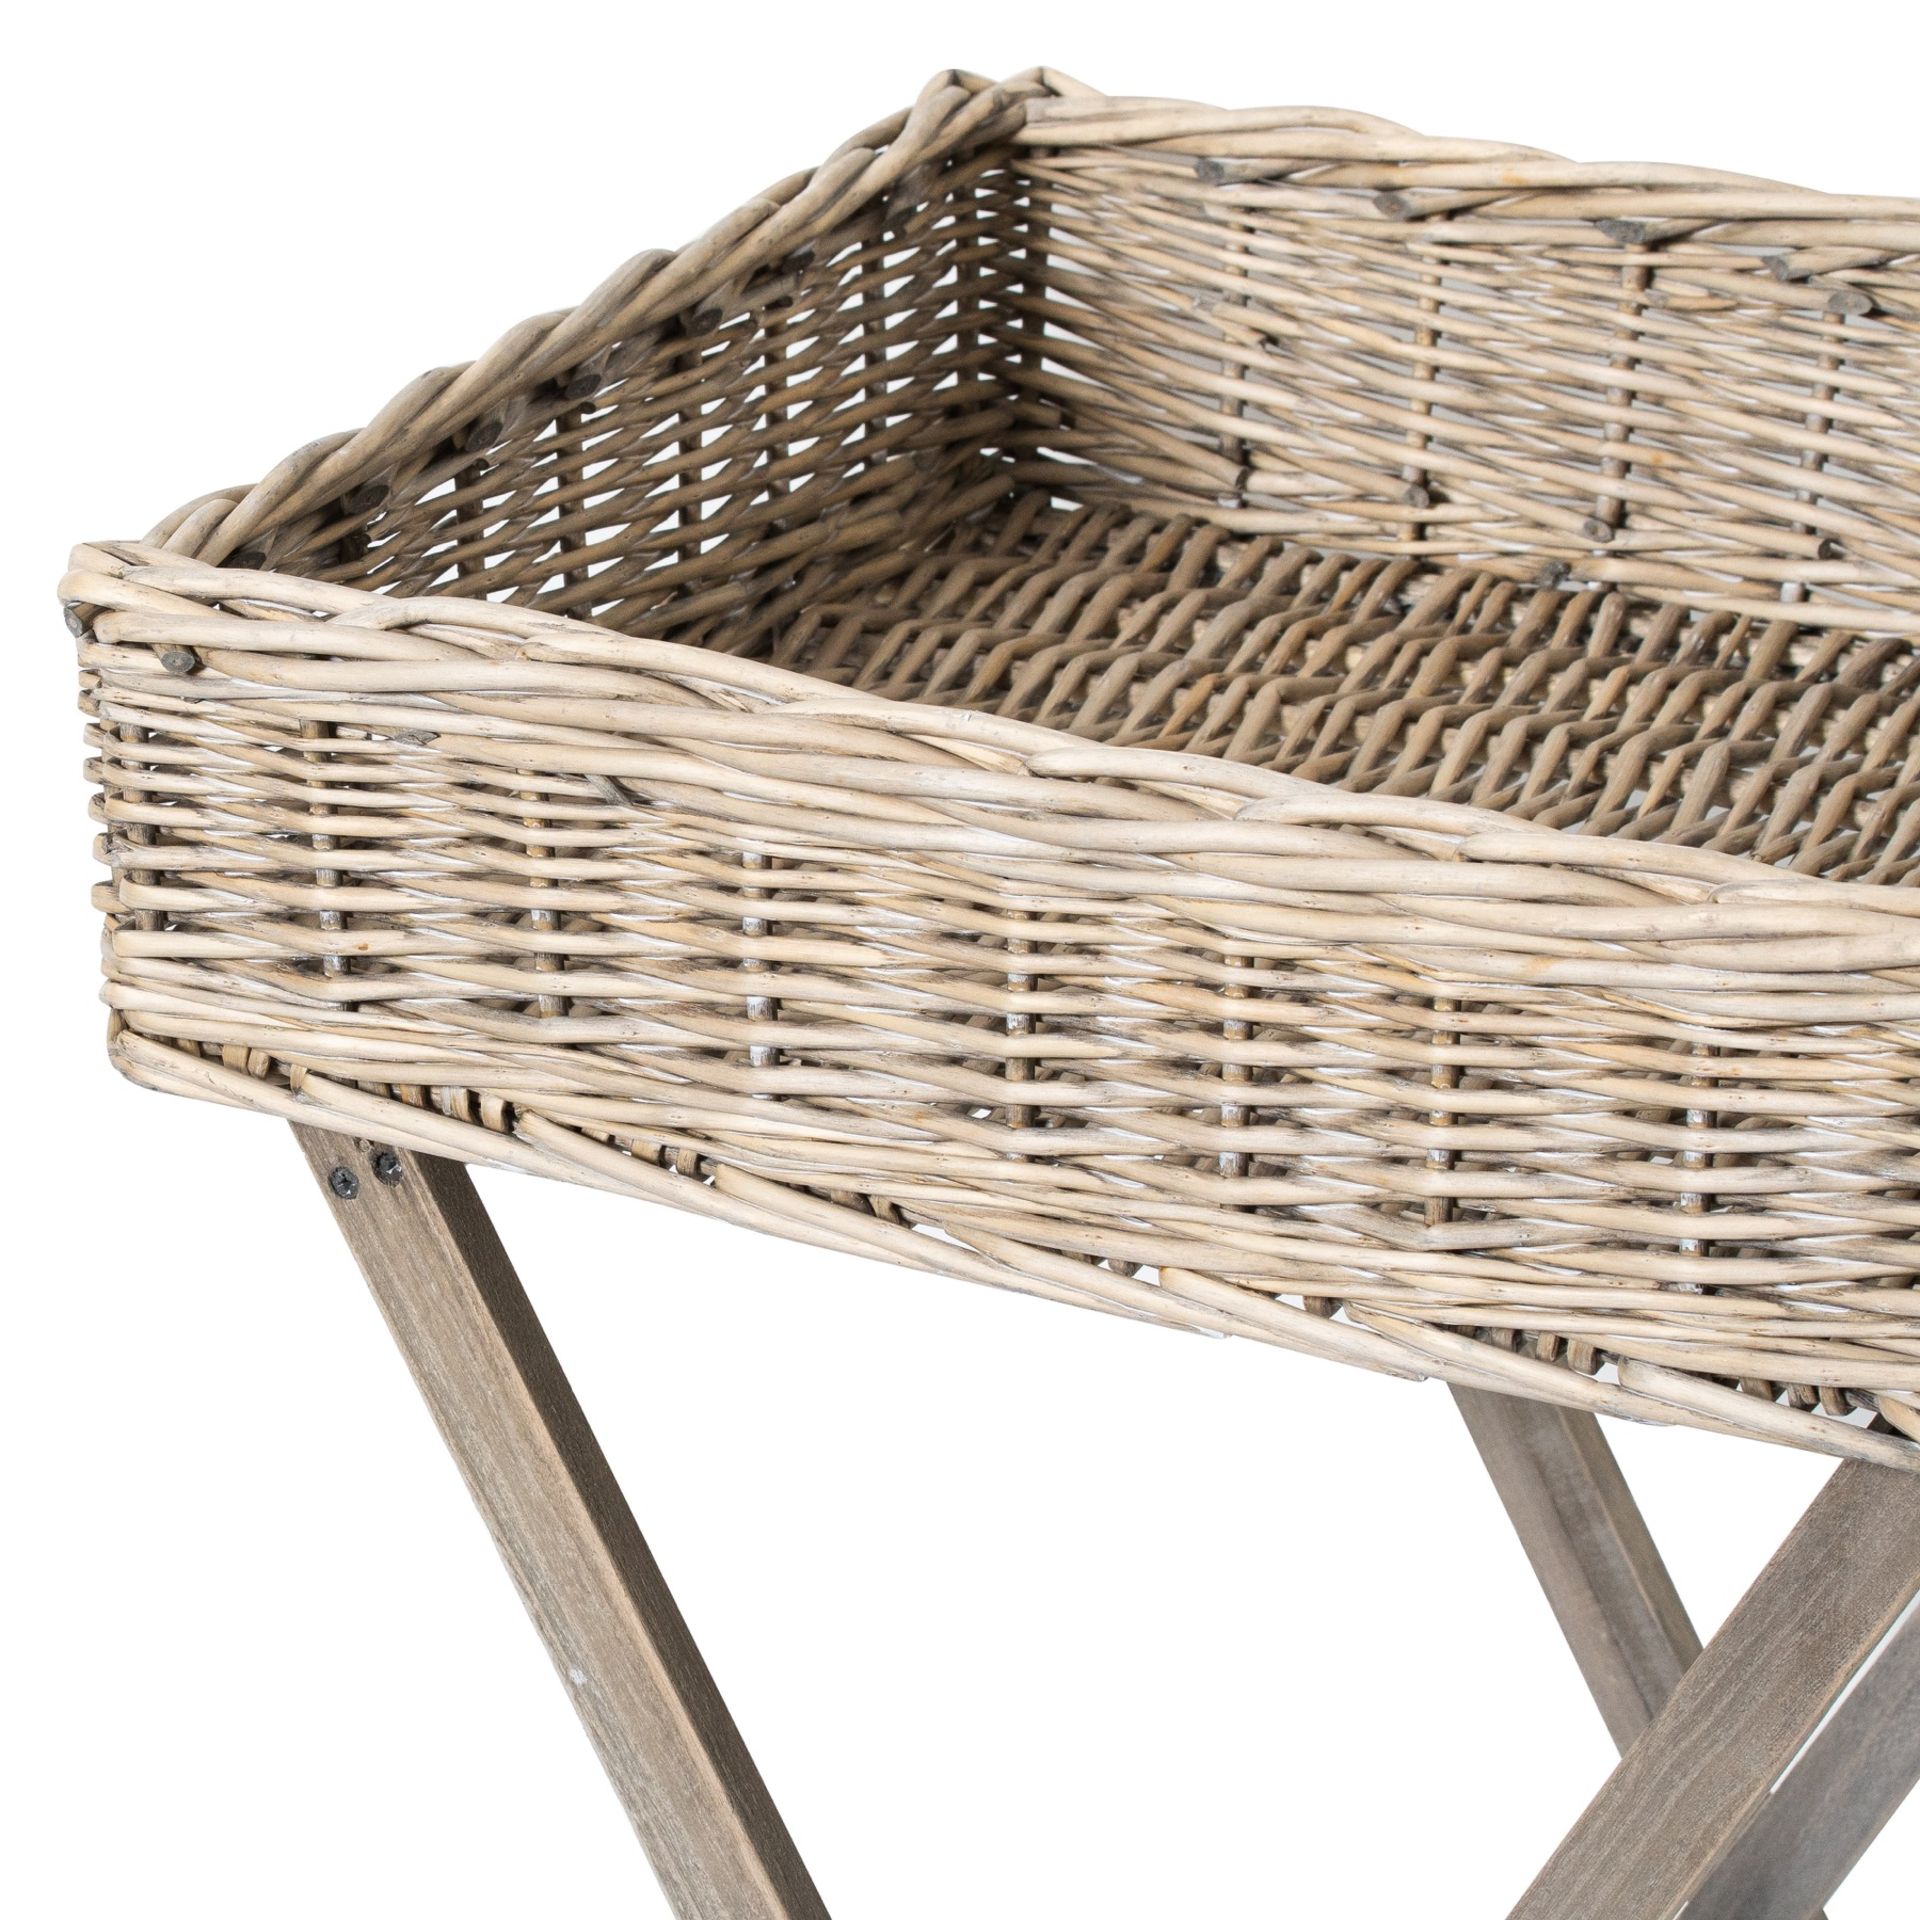 New Large Grey Wash Wicker Basket Butler Tray 21314 - 40L x 50W x 80H - Image 2 of 2